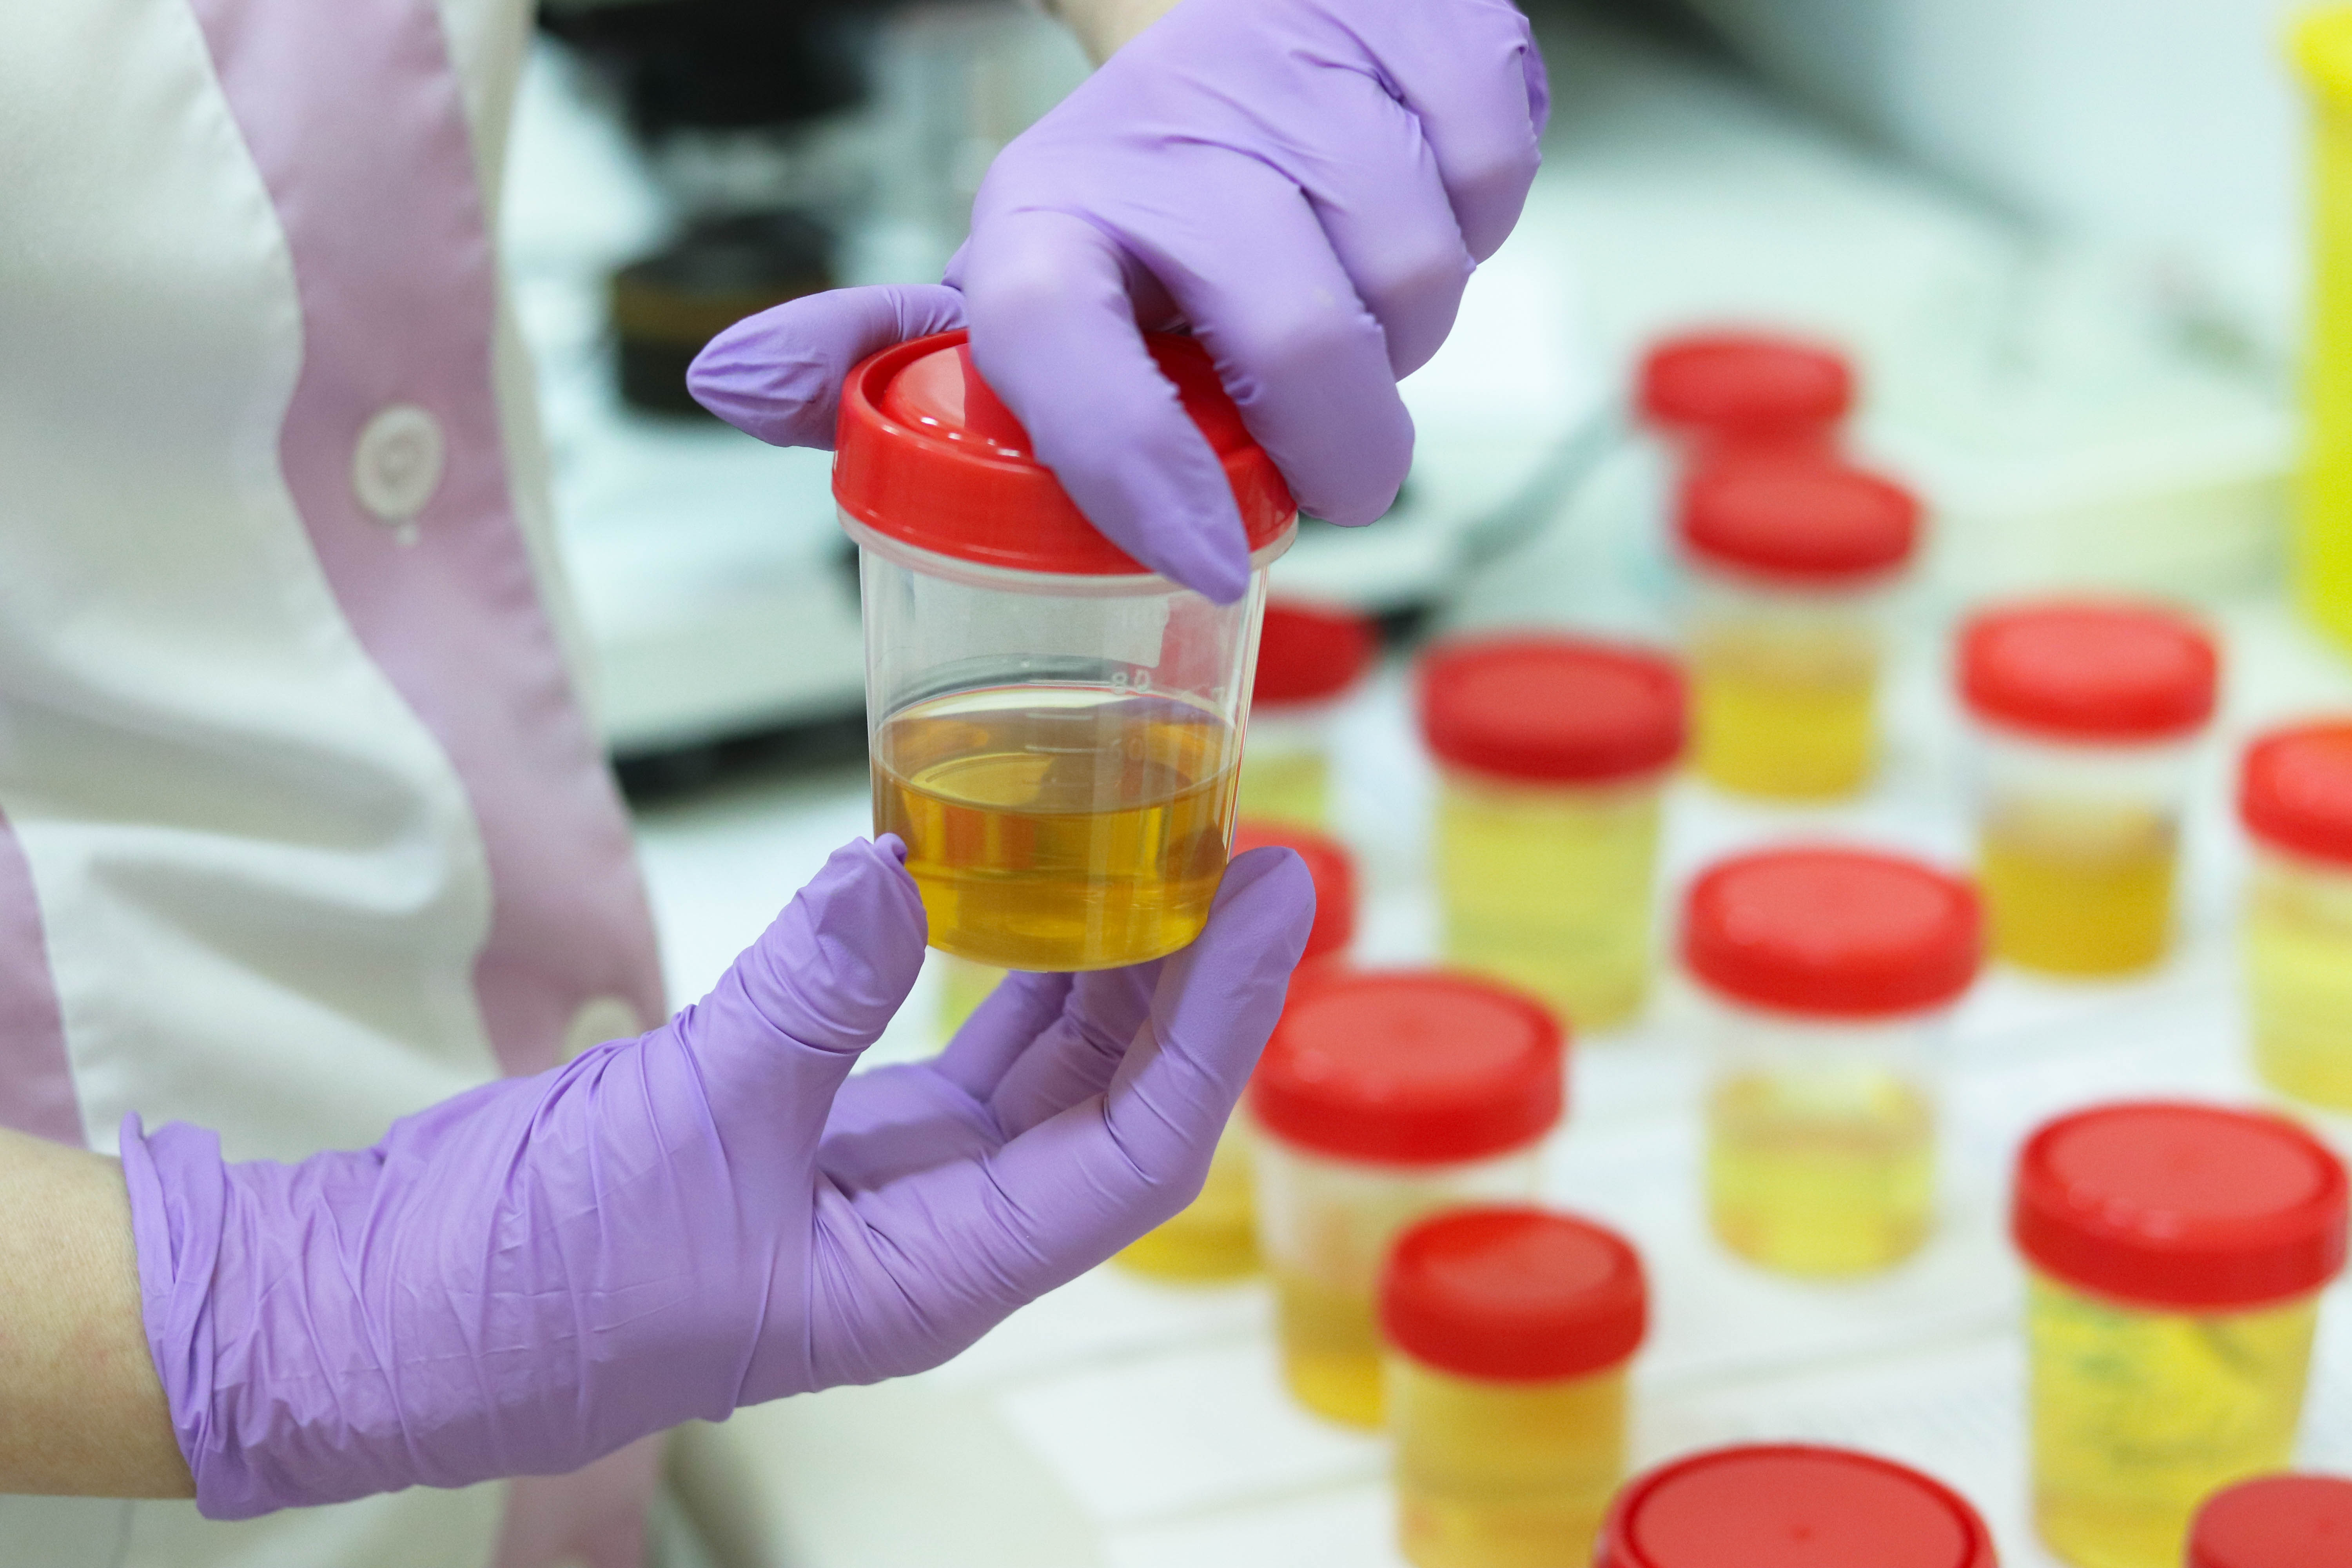 Does Bladder Cancer Show Blood in Every Urinalysis?